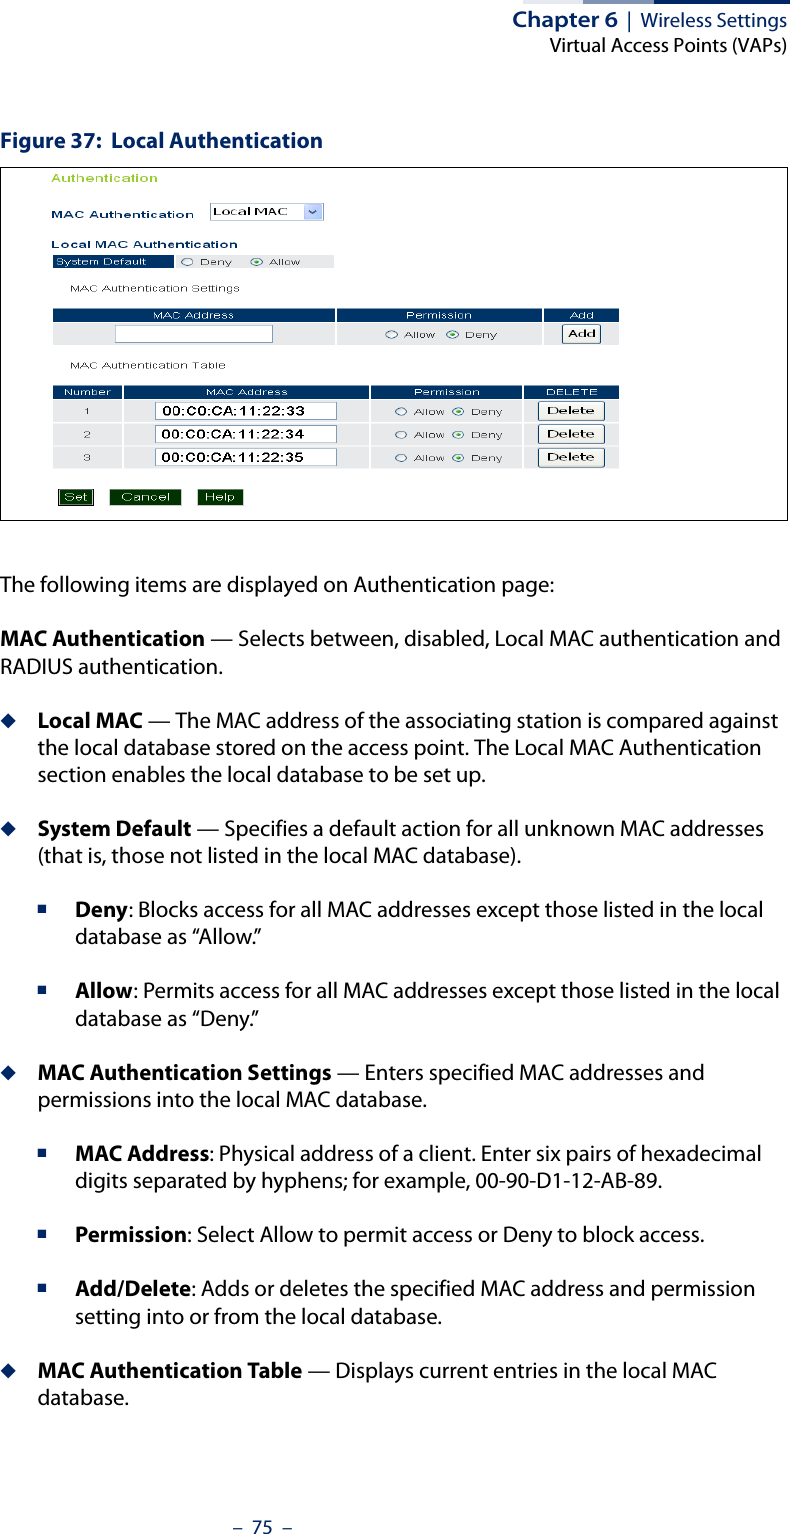 Chapter 6  |  Wireless SettingsVirtual Access Points (VAPs)–  75  –Figure 37:  Local AuthenticationThe following items are displayed on Authentication page:MAC Authentication — Selects between, disabled, Local MAC authentication and RADIUS authentication.◆Local MAC — The MAC address of the associating station is compared against the local database stored on the access point. The Local MAC Authentication section enables the local database to be set up.◆System Default — Specifies a default action for all unknown MAC addresses (that is, those not listed in the local MAC database).■Deny: Blocks access for all MAC addresses except those listed in the local database as “Allow.” ■Allow: Permits access for all MAC addresses except those listed in the local database as “Deny.”◆MAC Authentication Settings — Enters specified MAC addresses and permissions into the local MAC database.■MAC Address: Physical address of a client. Enter six pairs of hexadecimal digits separated by hyphens; for example, 00-90-D1-12-AB-89.■Permission: Select Allow to permit access or Deny to block access.■Add/Delete: Adds or deletes the specified MAC address and permission setting into or from the local database.◆MAC Authentication Table — Displays current entries in the local MAC database.